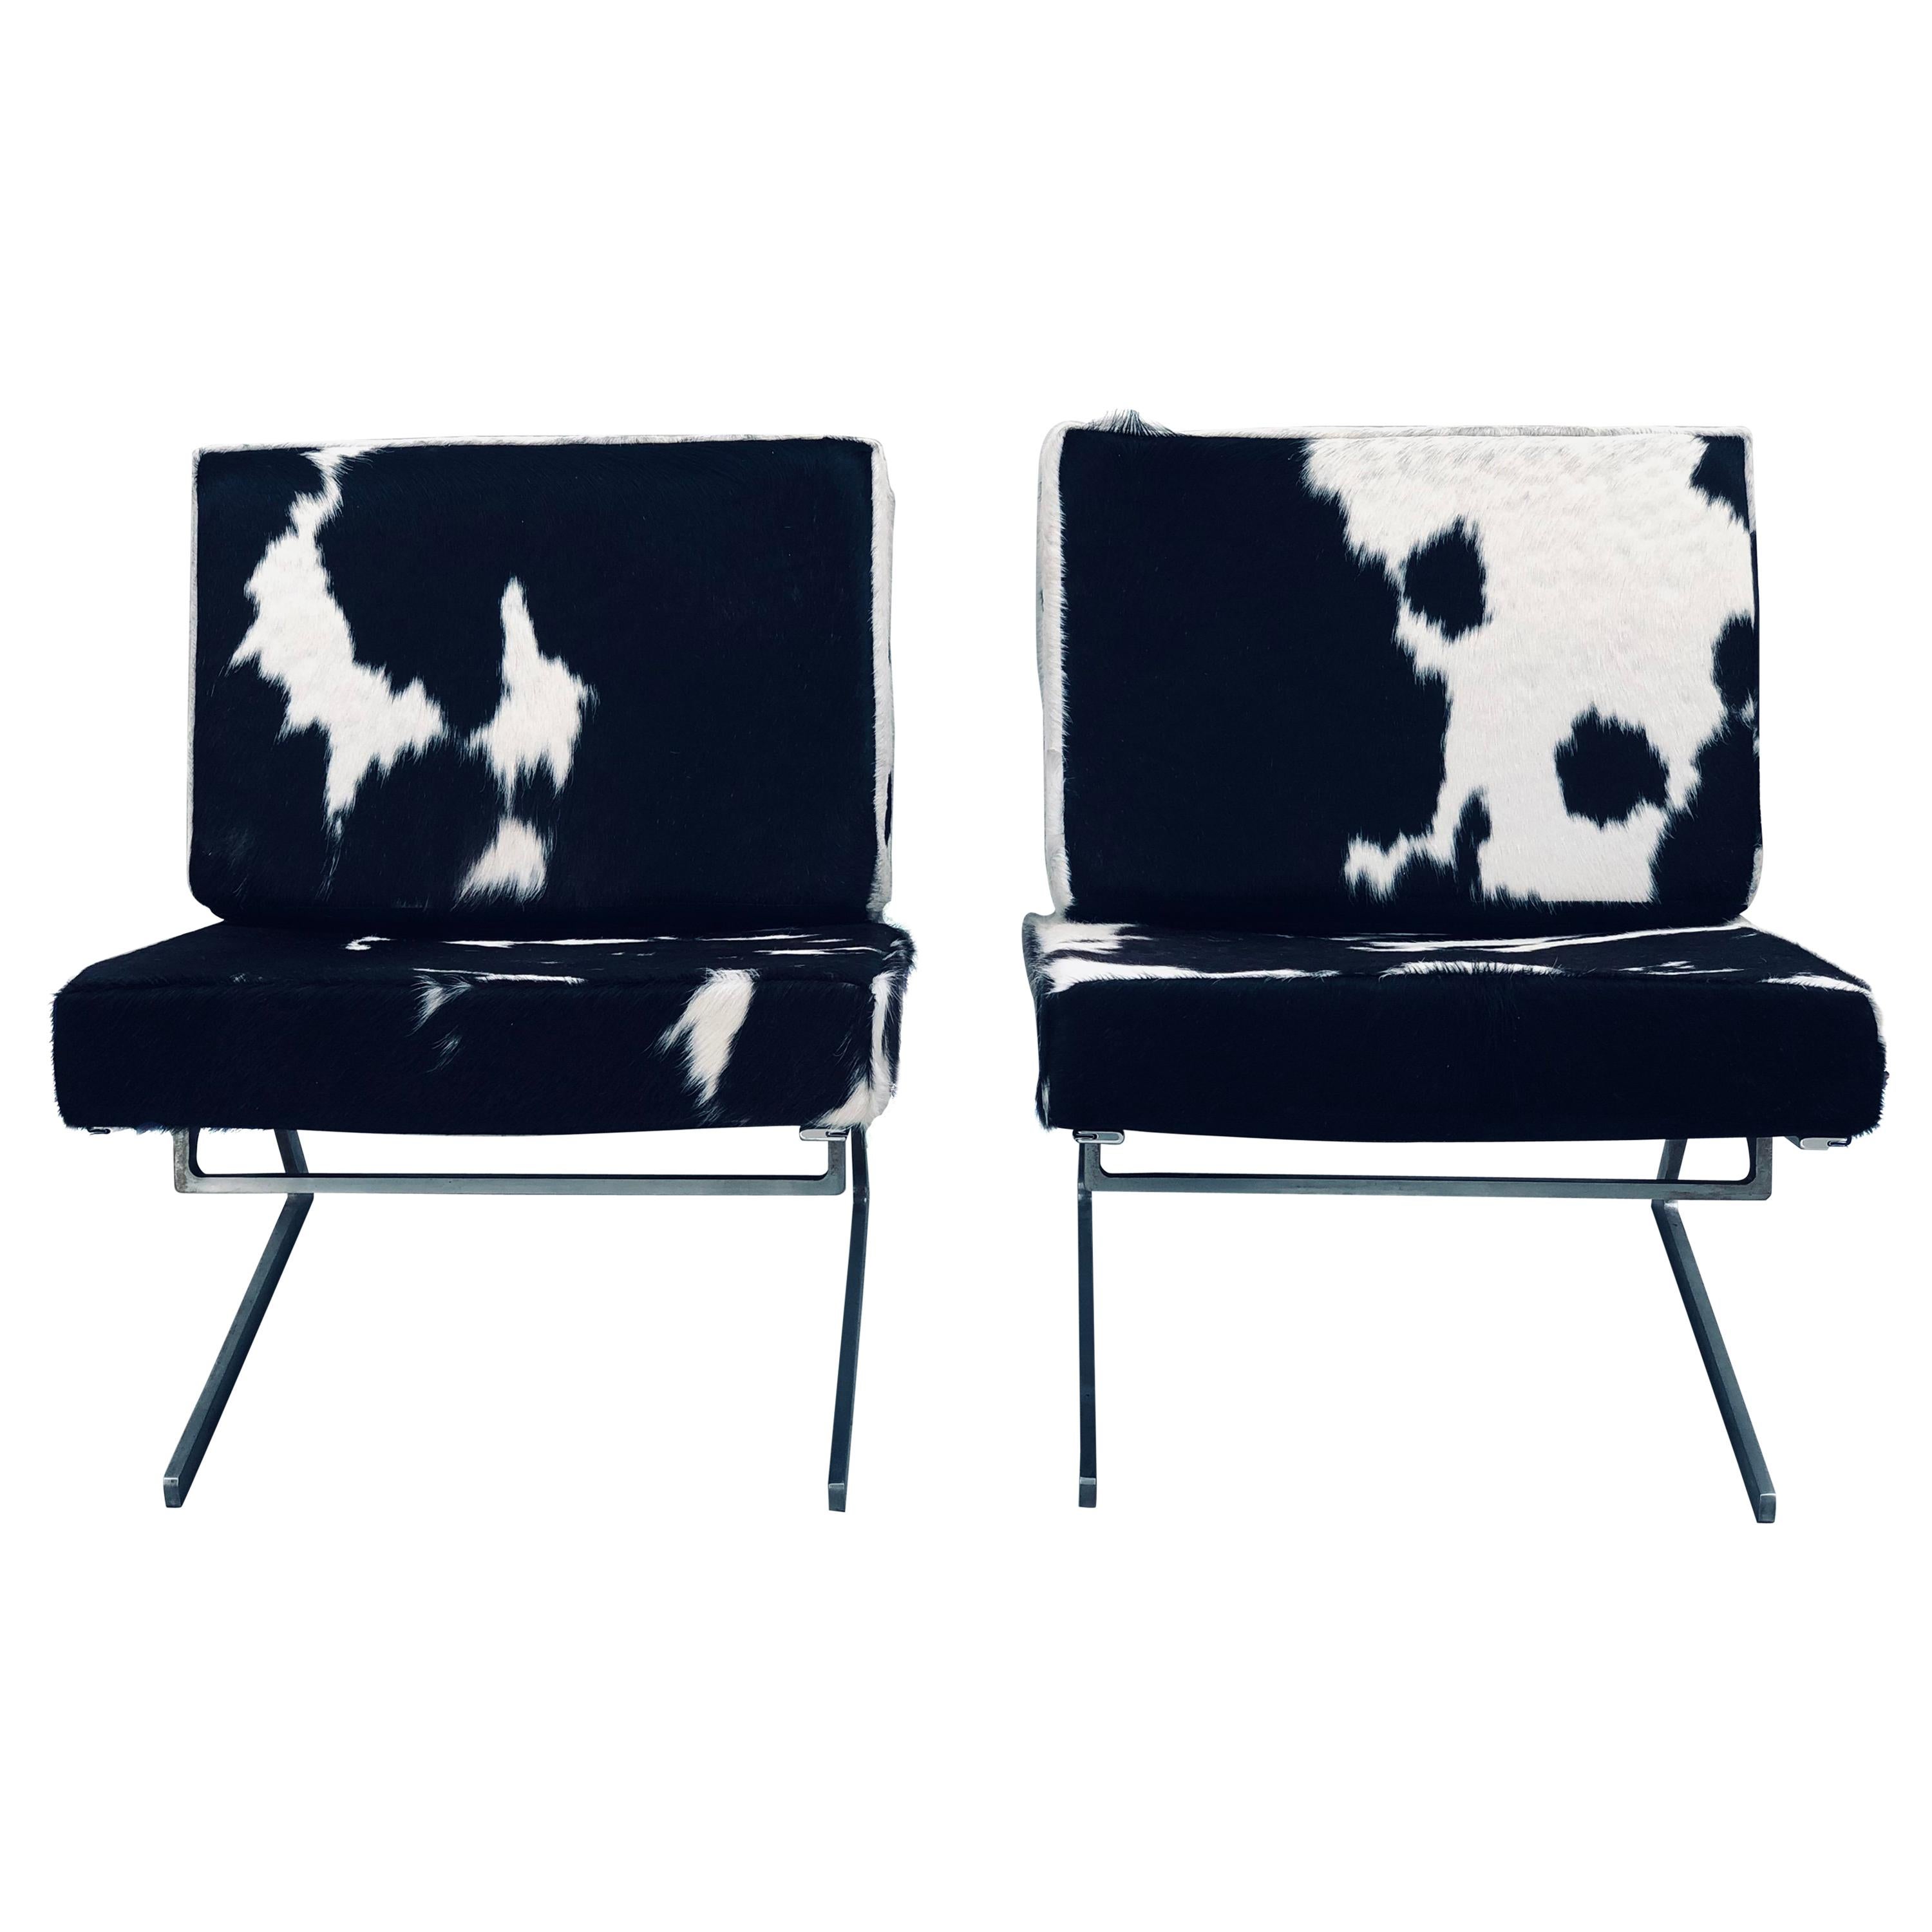 Pair of Stainless Steel and Cowhide Lounge Chairs